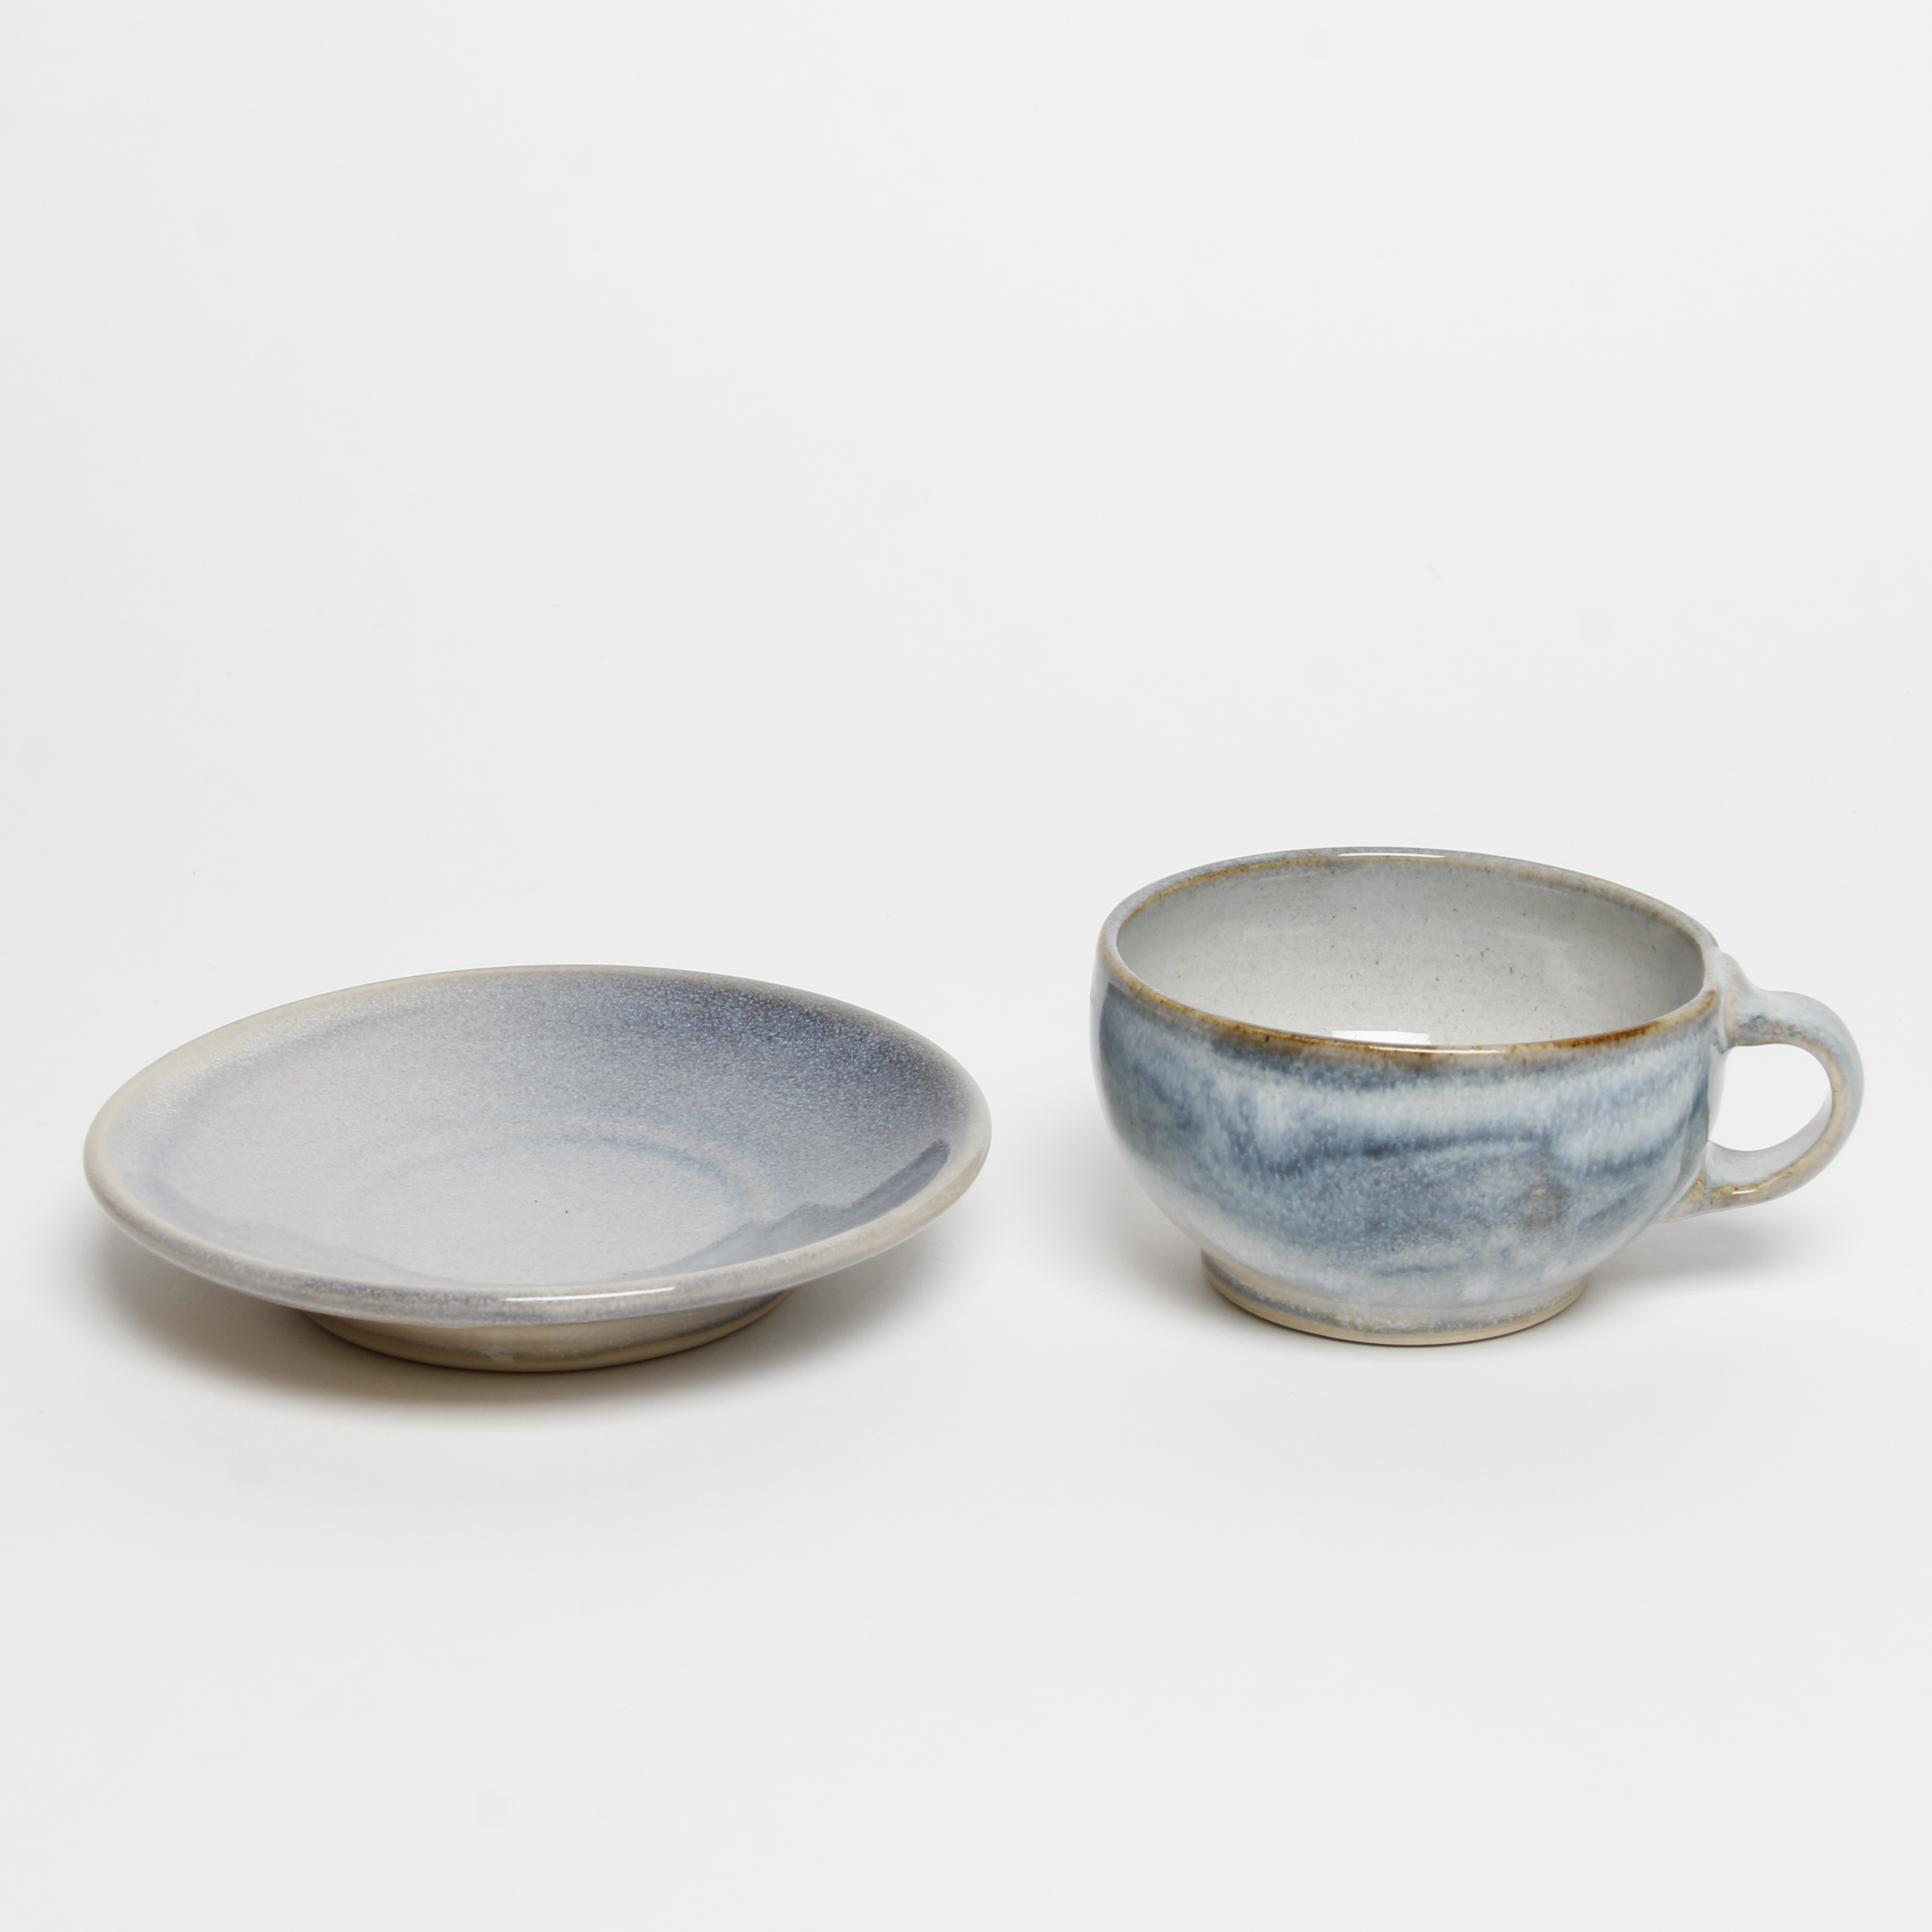 Teresa Dunlop: Cappuccino Cup Product Image 6 of 6